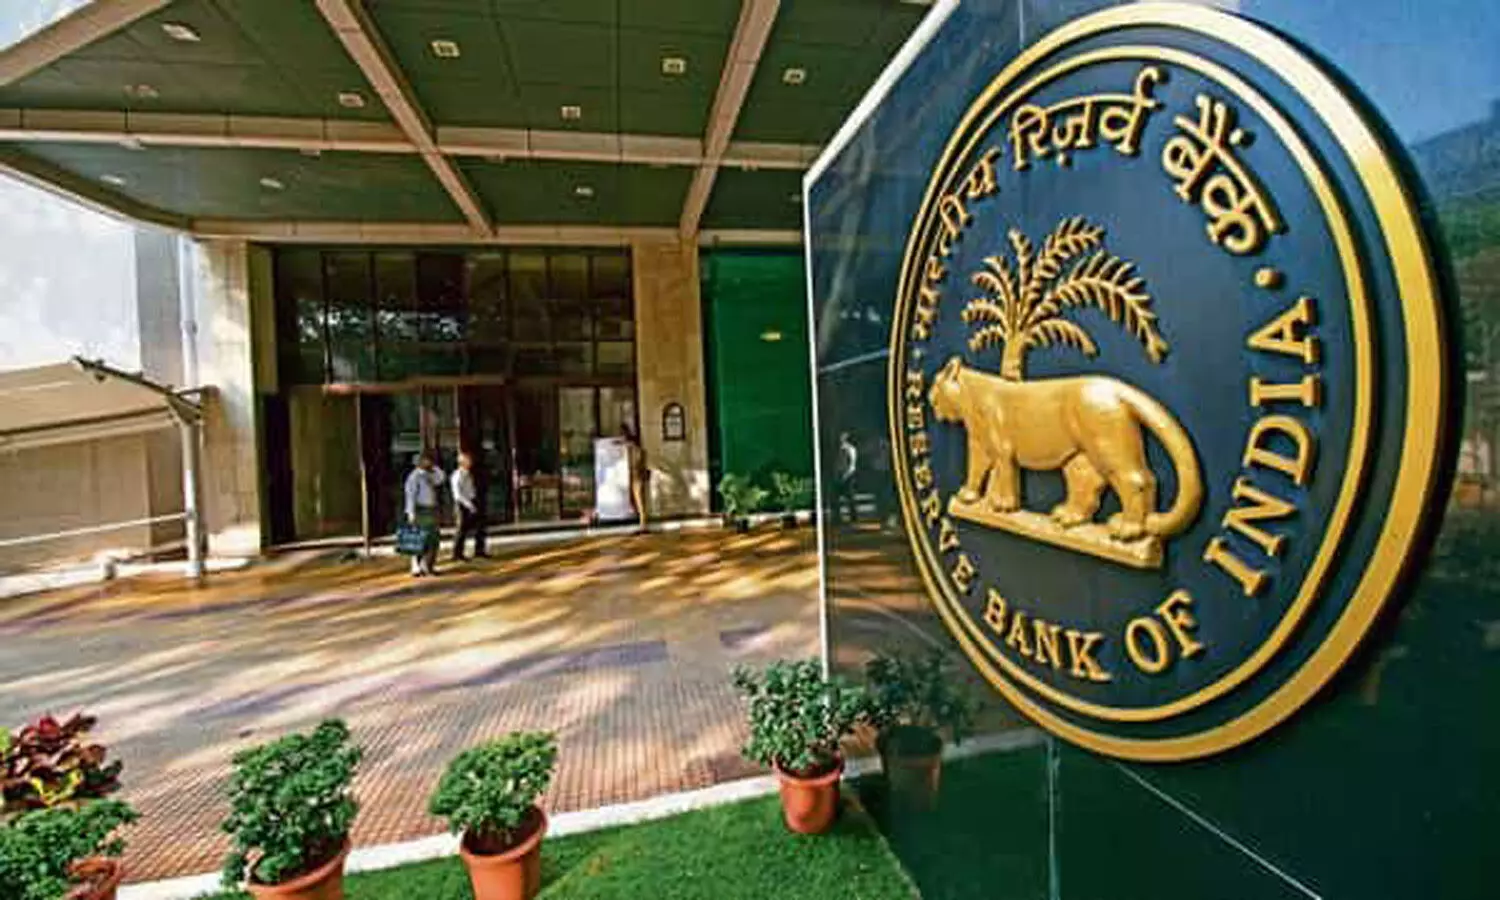 RBI Recruitment: Few days left to apply for over 300 vacancies at rbi.org.in, details here